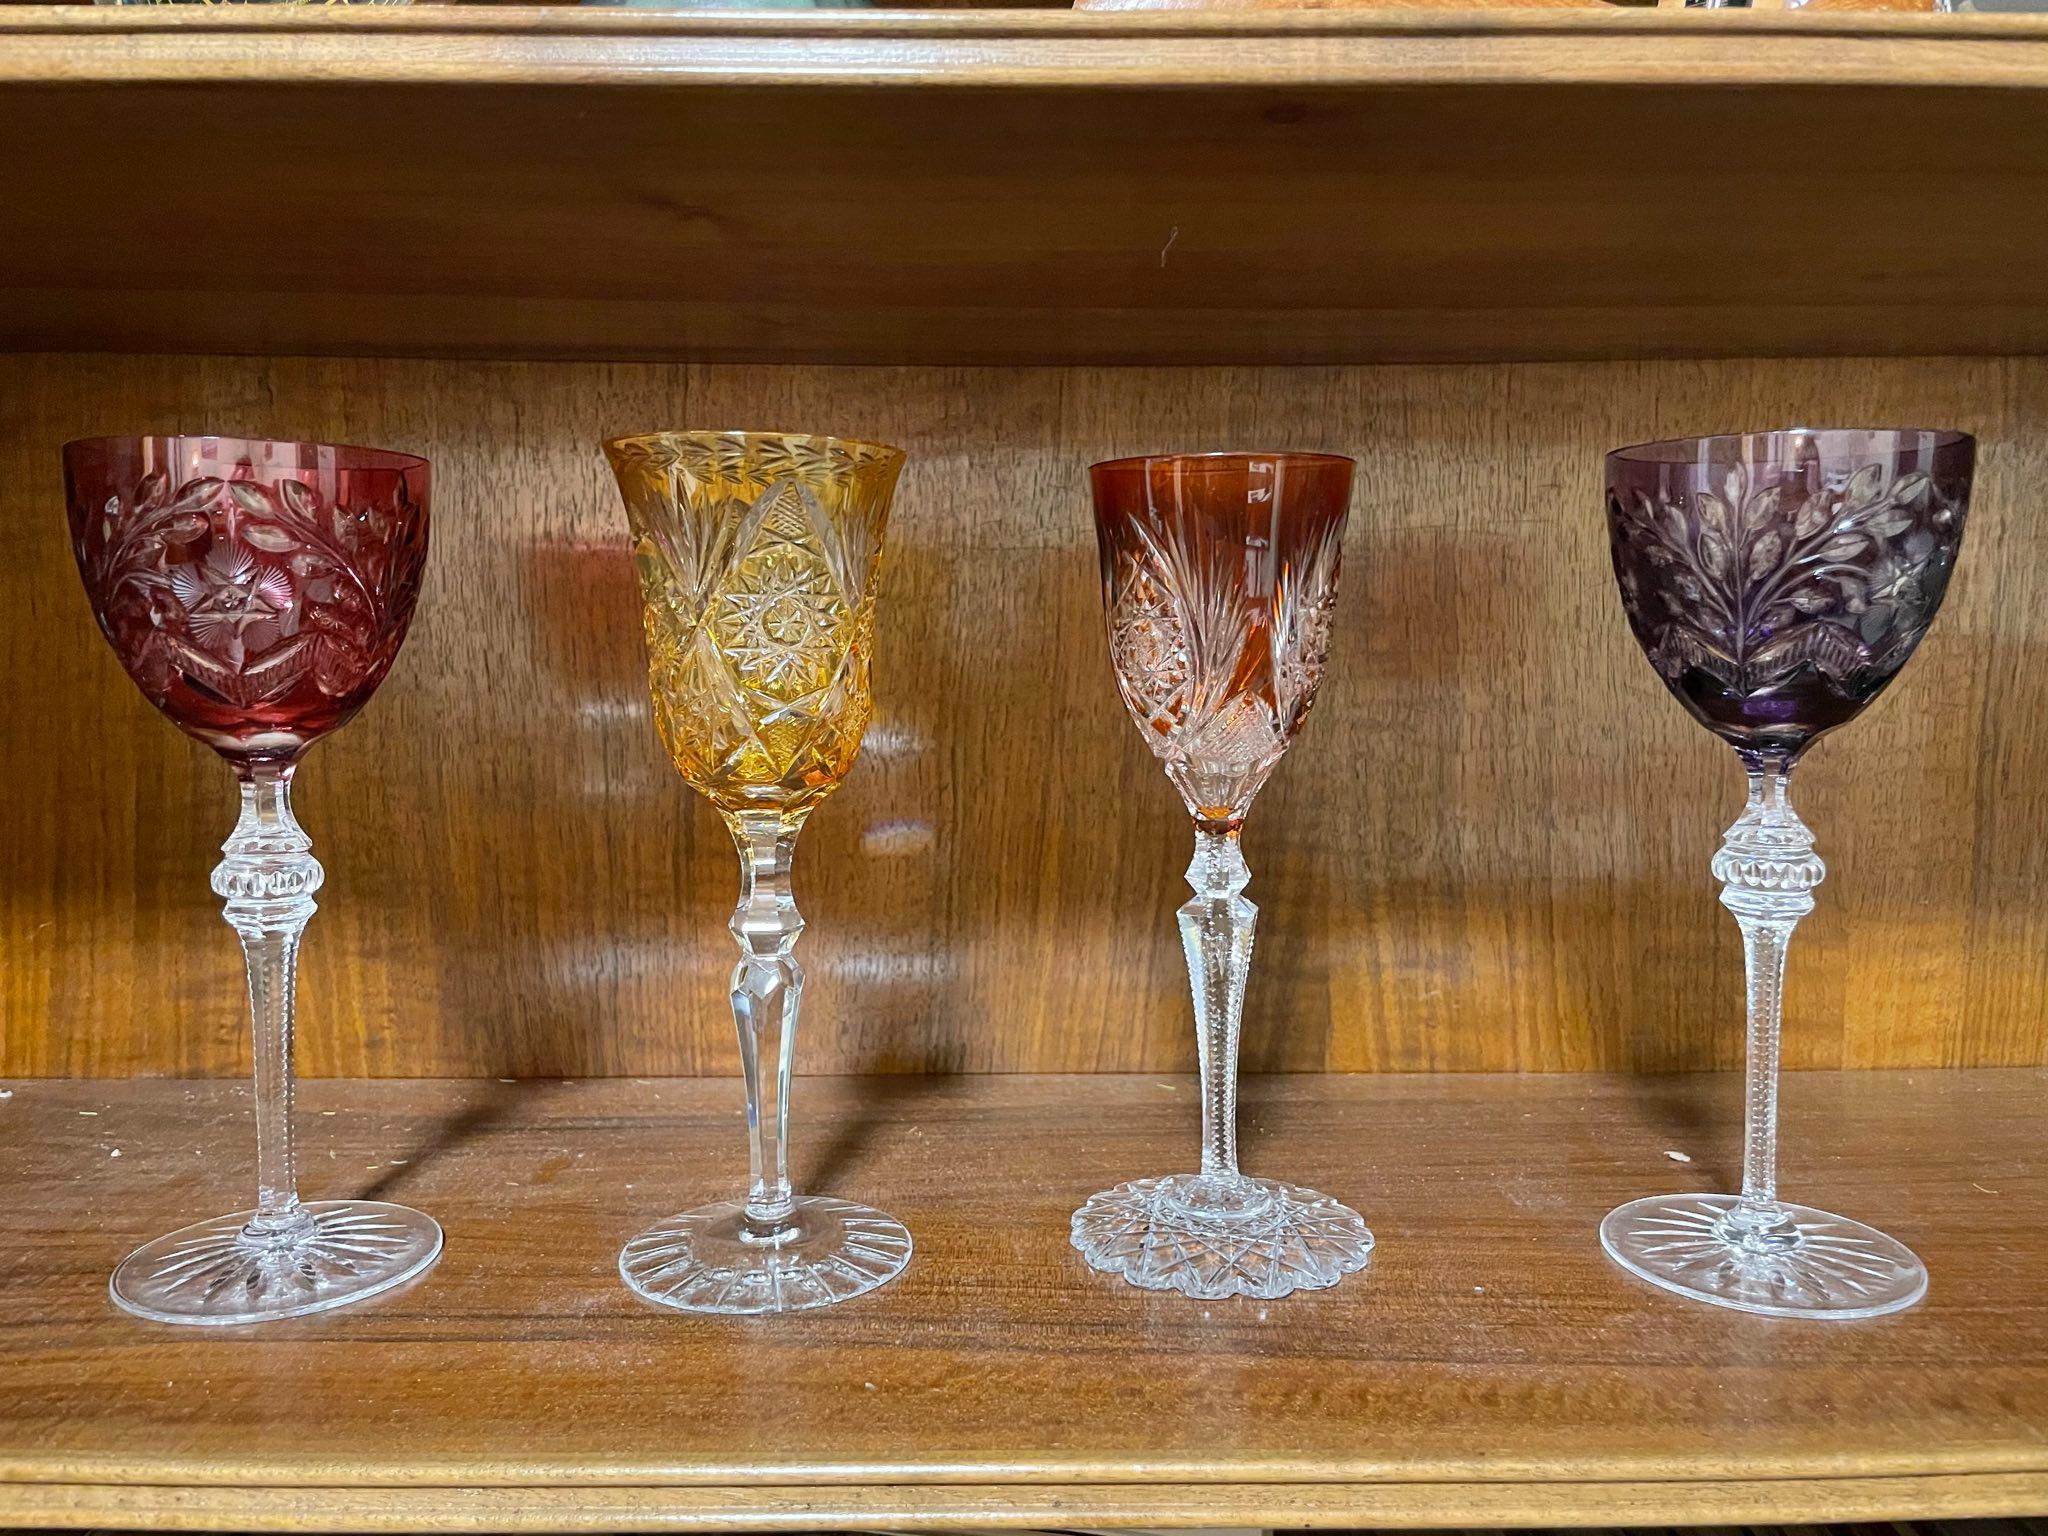 4 Kelche Kristall farbig – 4 colored crystal goblets